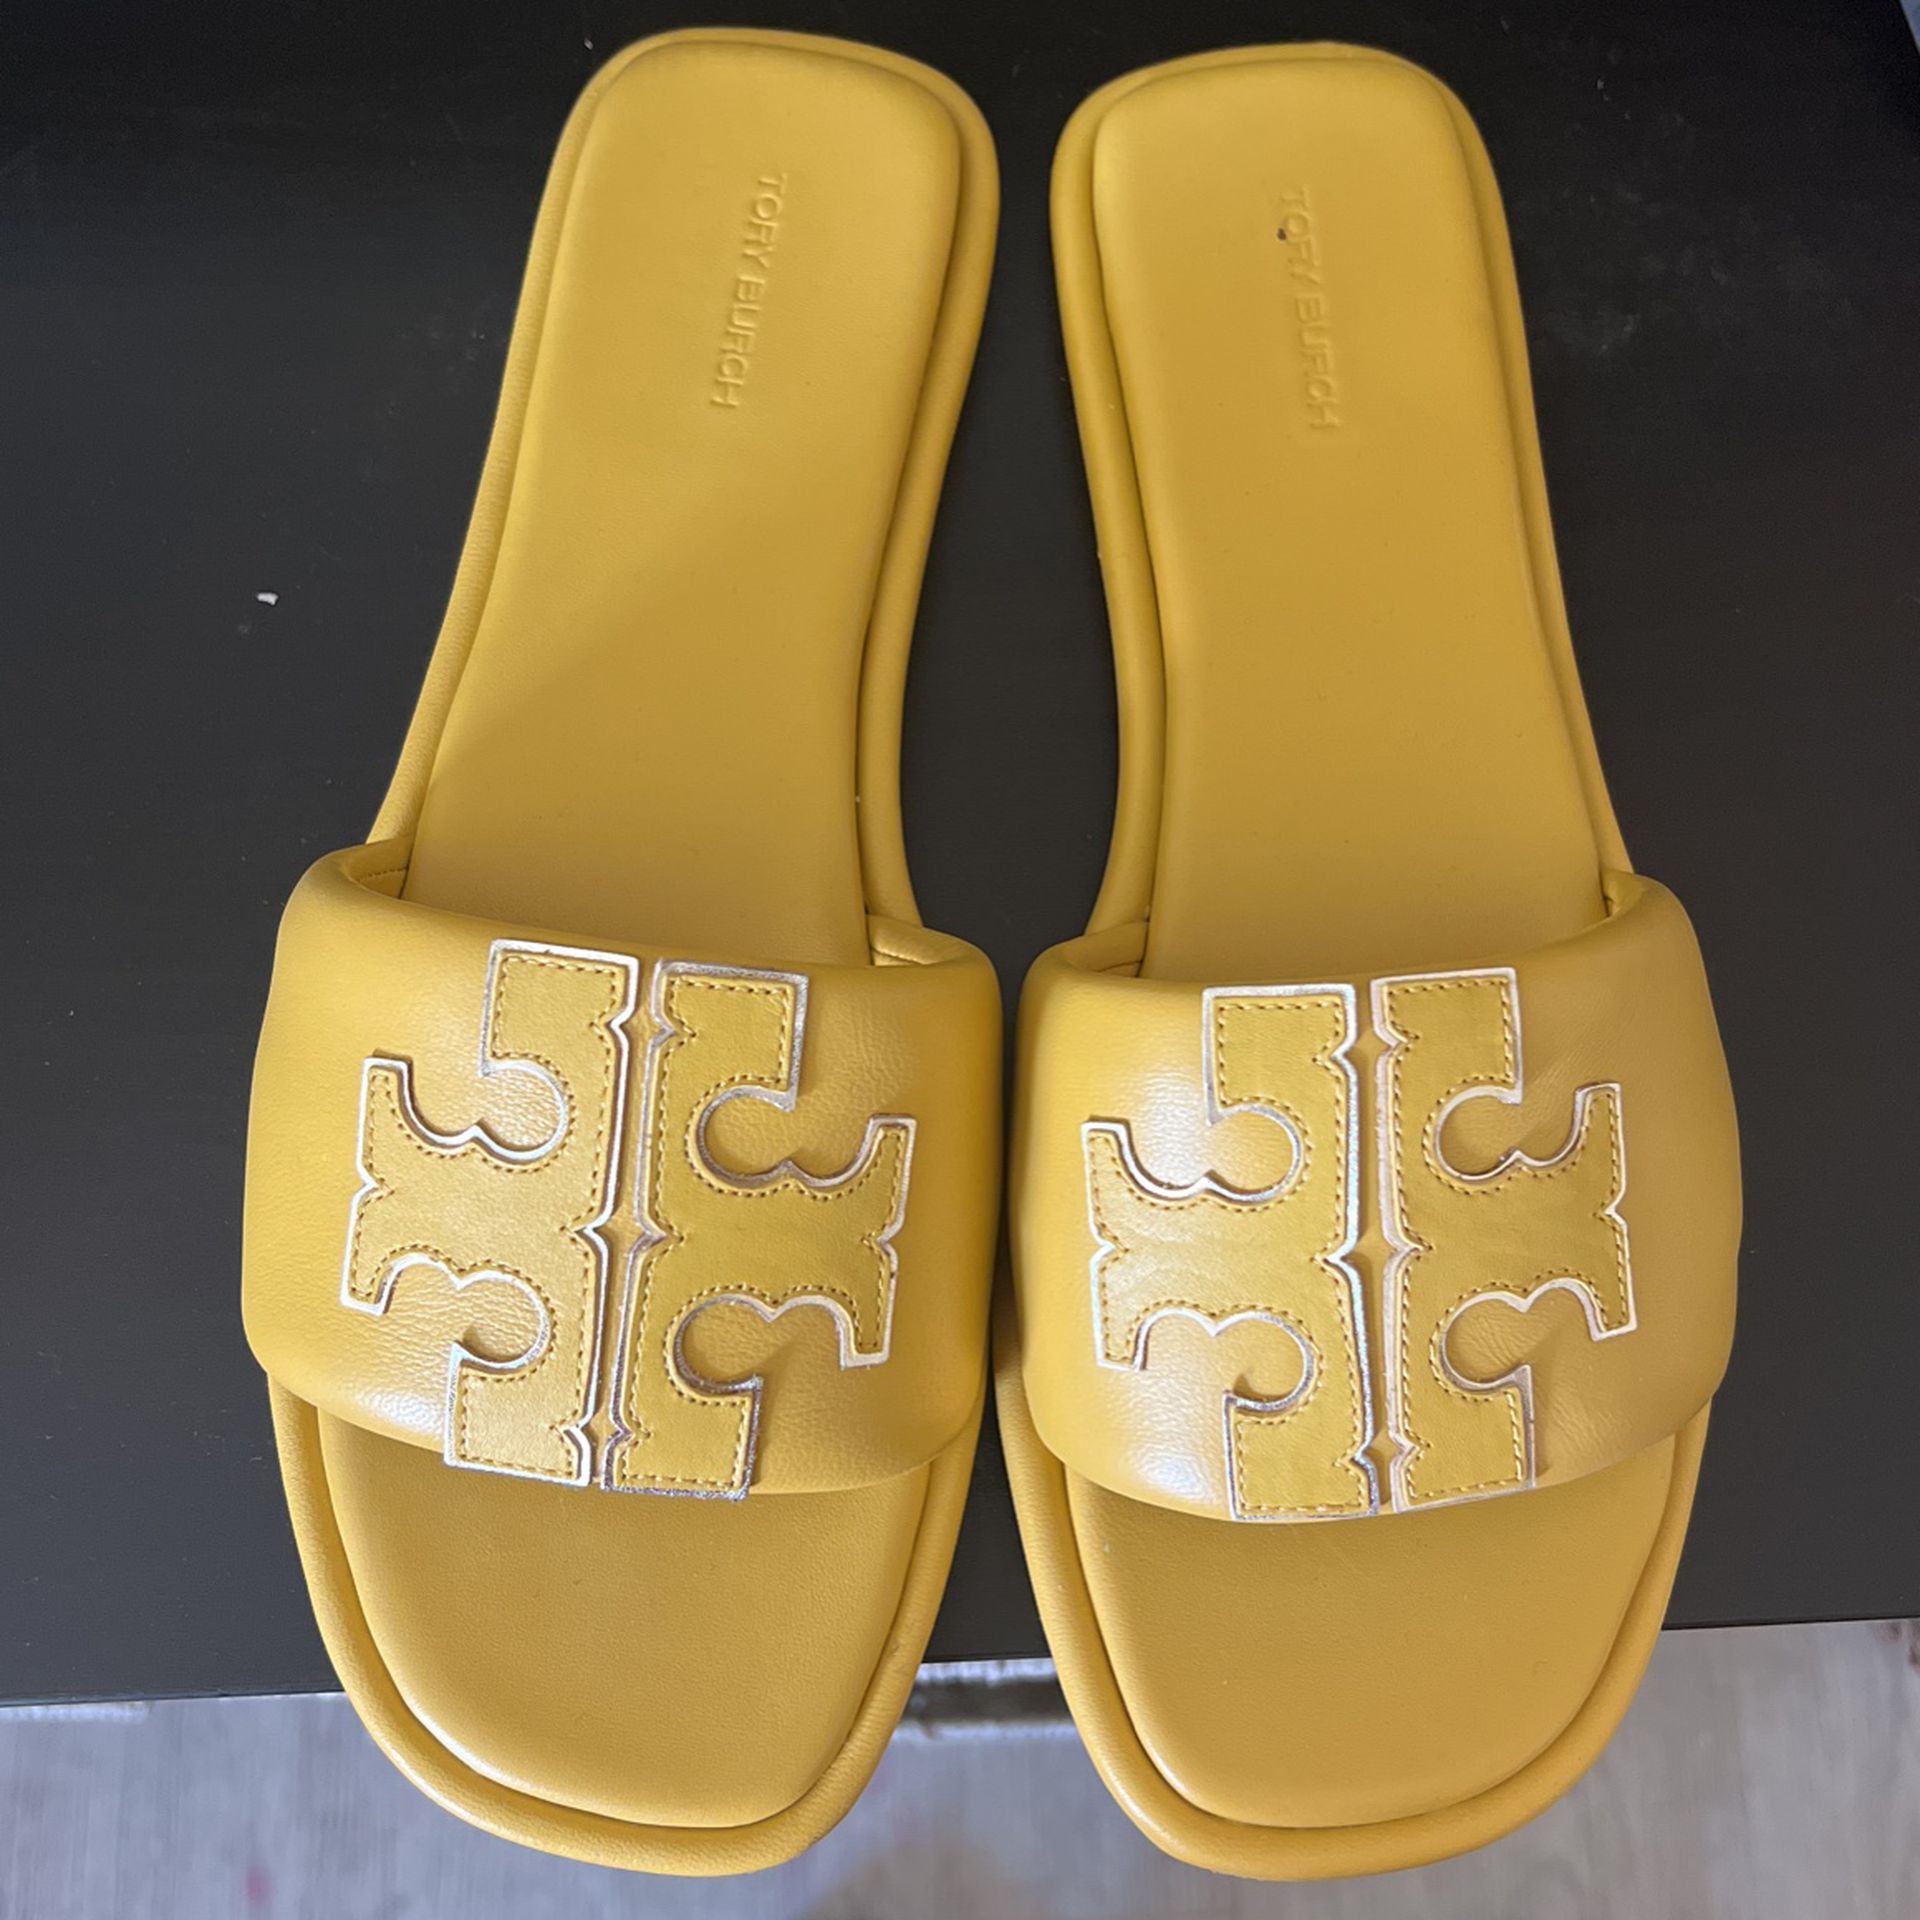 Tory Burch Double T Sport Slides Sandals for Sale in North Las Vegas, NV -  OfferUp